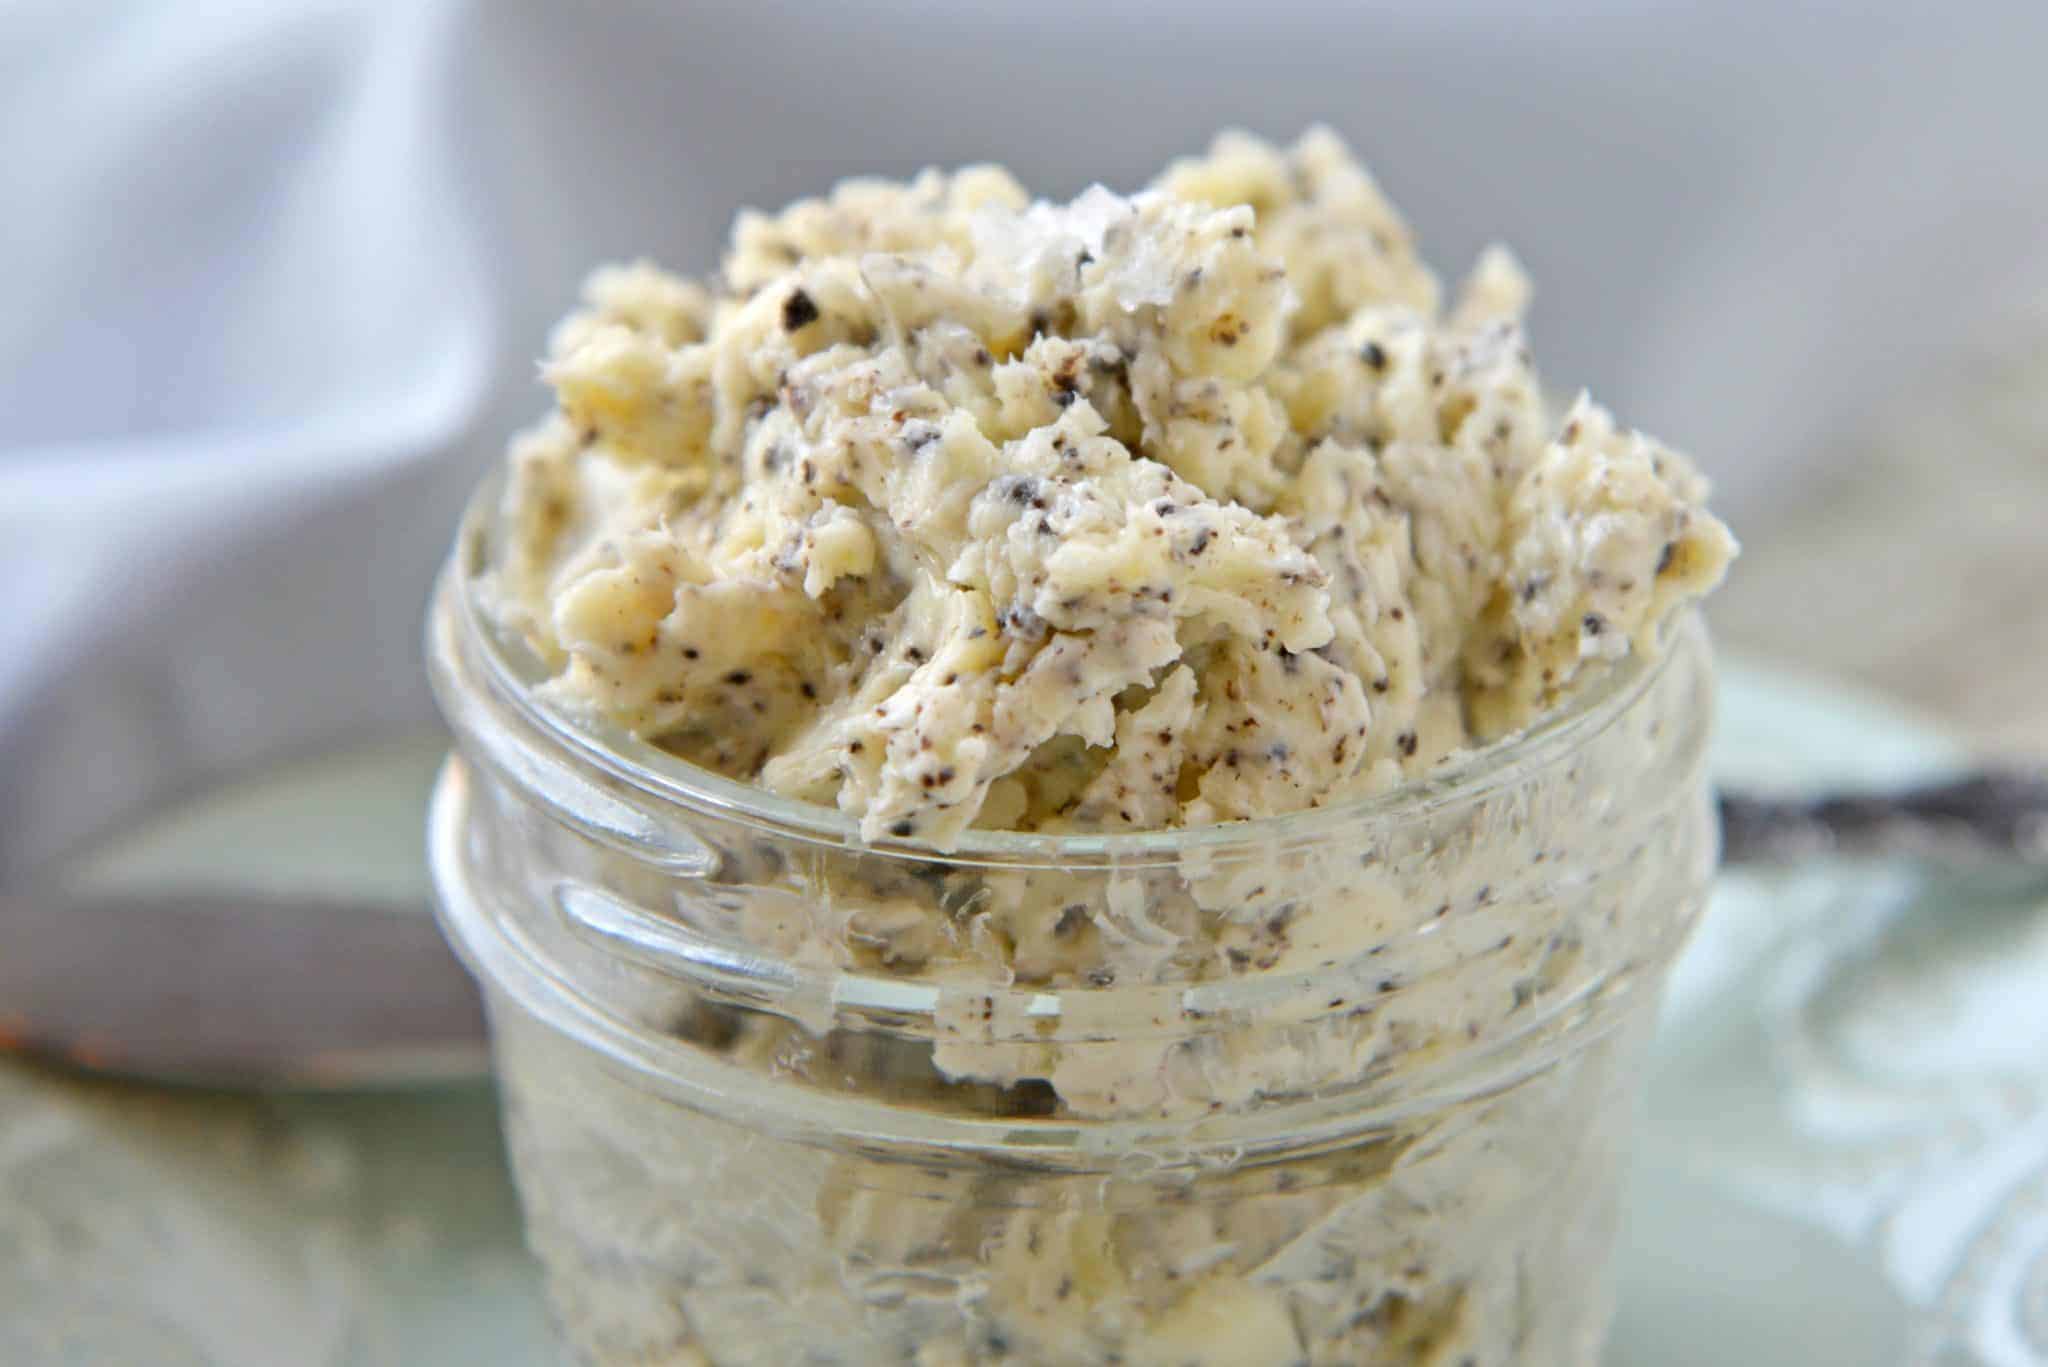 This Homemade Black Truffle Butter is so easy to make! Only 3 ingredients and a few minutes needed. You'll never get it at the store again! #trufflebutter #blacktrufflebutter #whatistrufflebutter www.savoryexperiments.com 